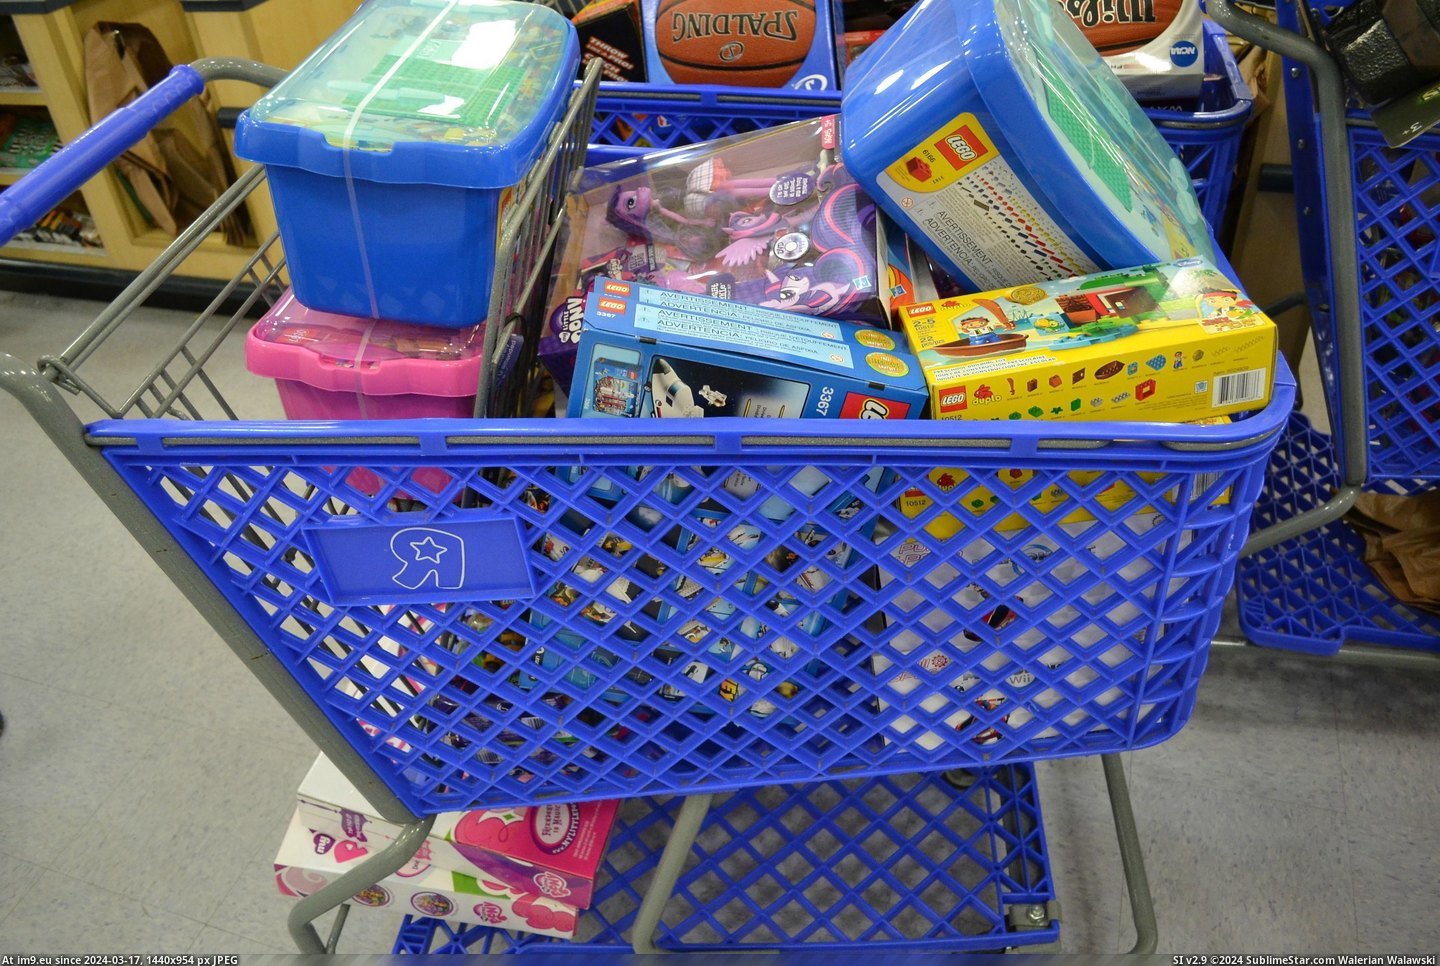 #For #Happy #All #Bunch #Tots #Donated #Christmas #Toys #Kids [Pics] Hopefully this makes a bunch of kids happy this Christmas all donated to Toys for Tots. 4 Pic. (Изображение из альбом My r/PICS favs))